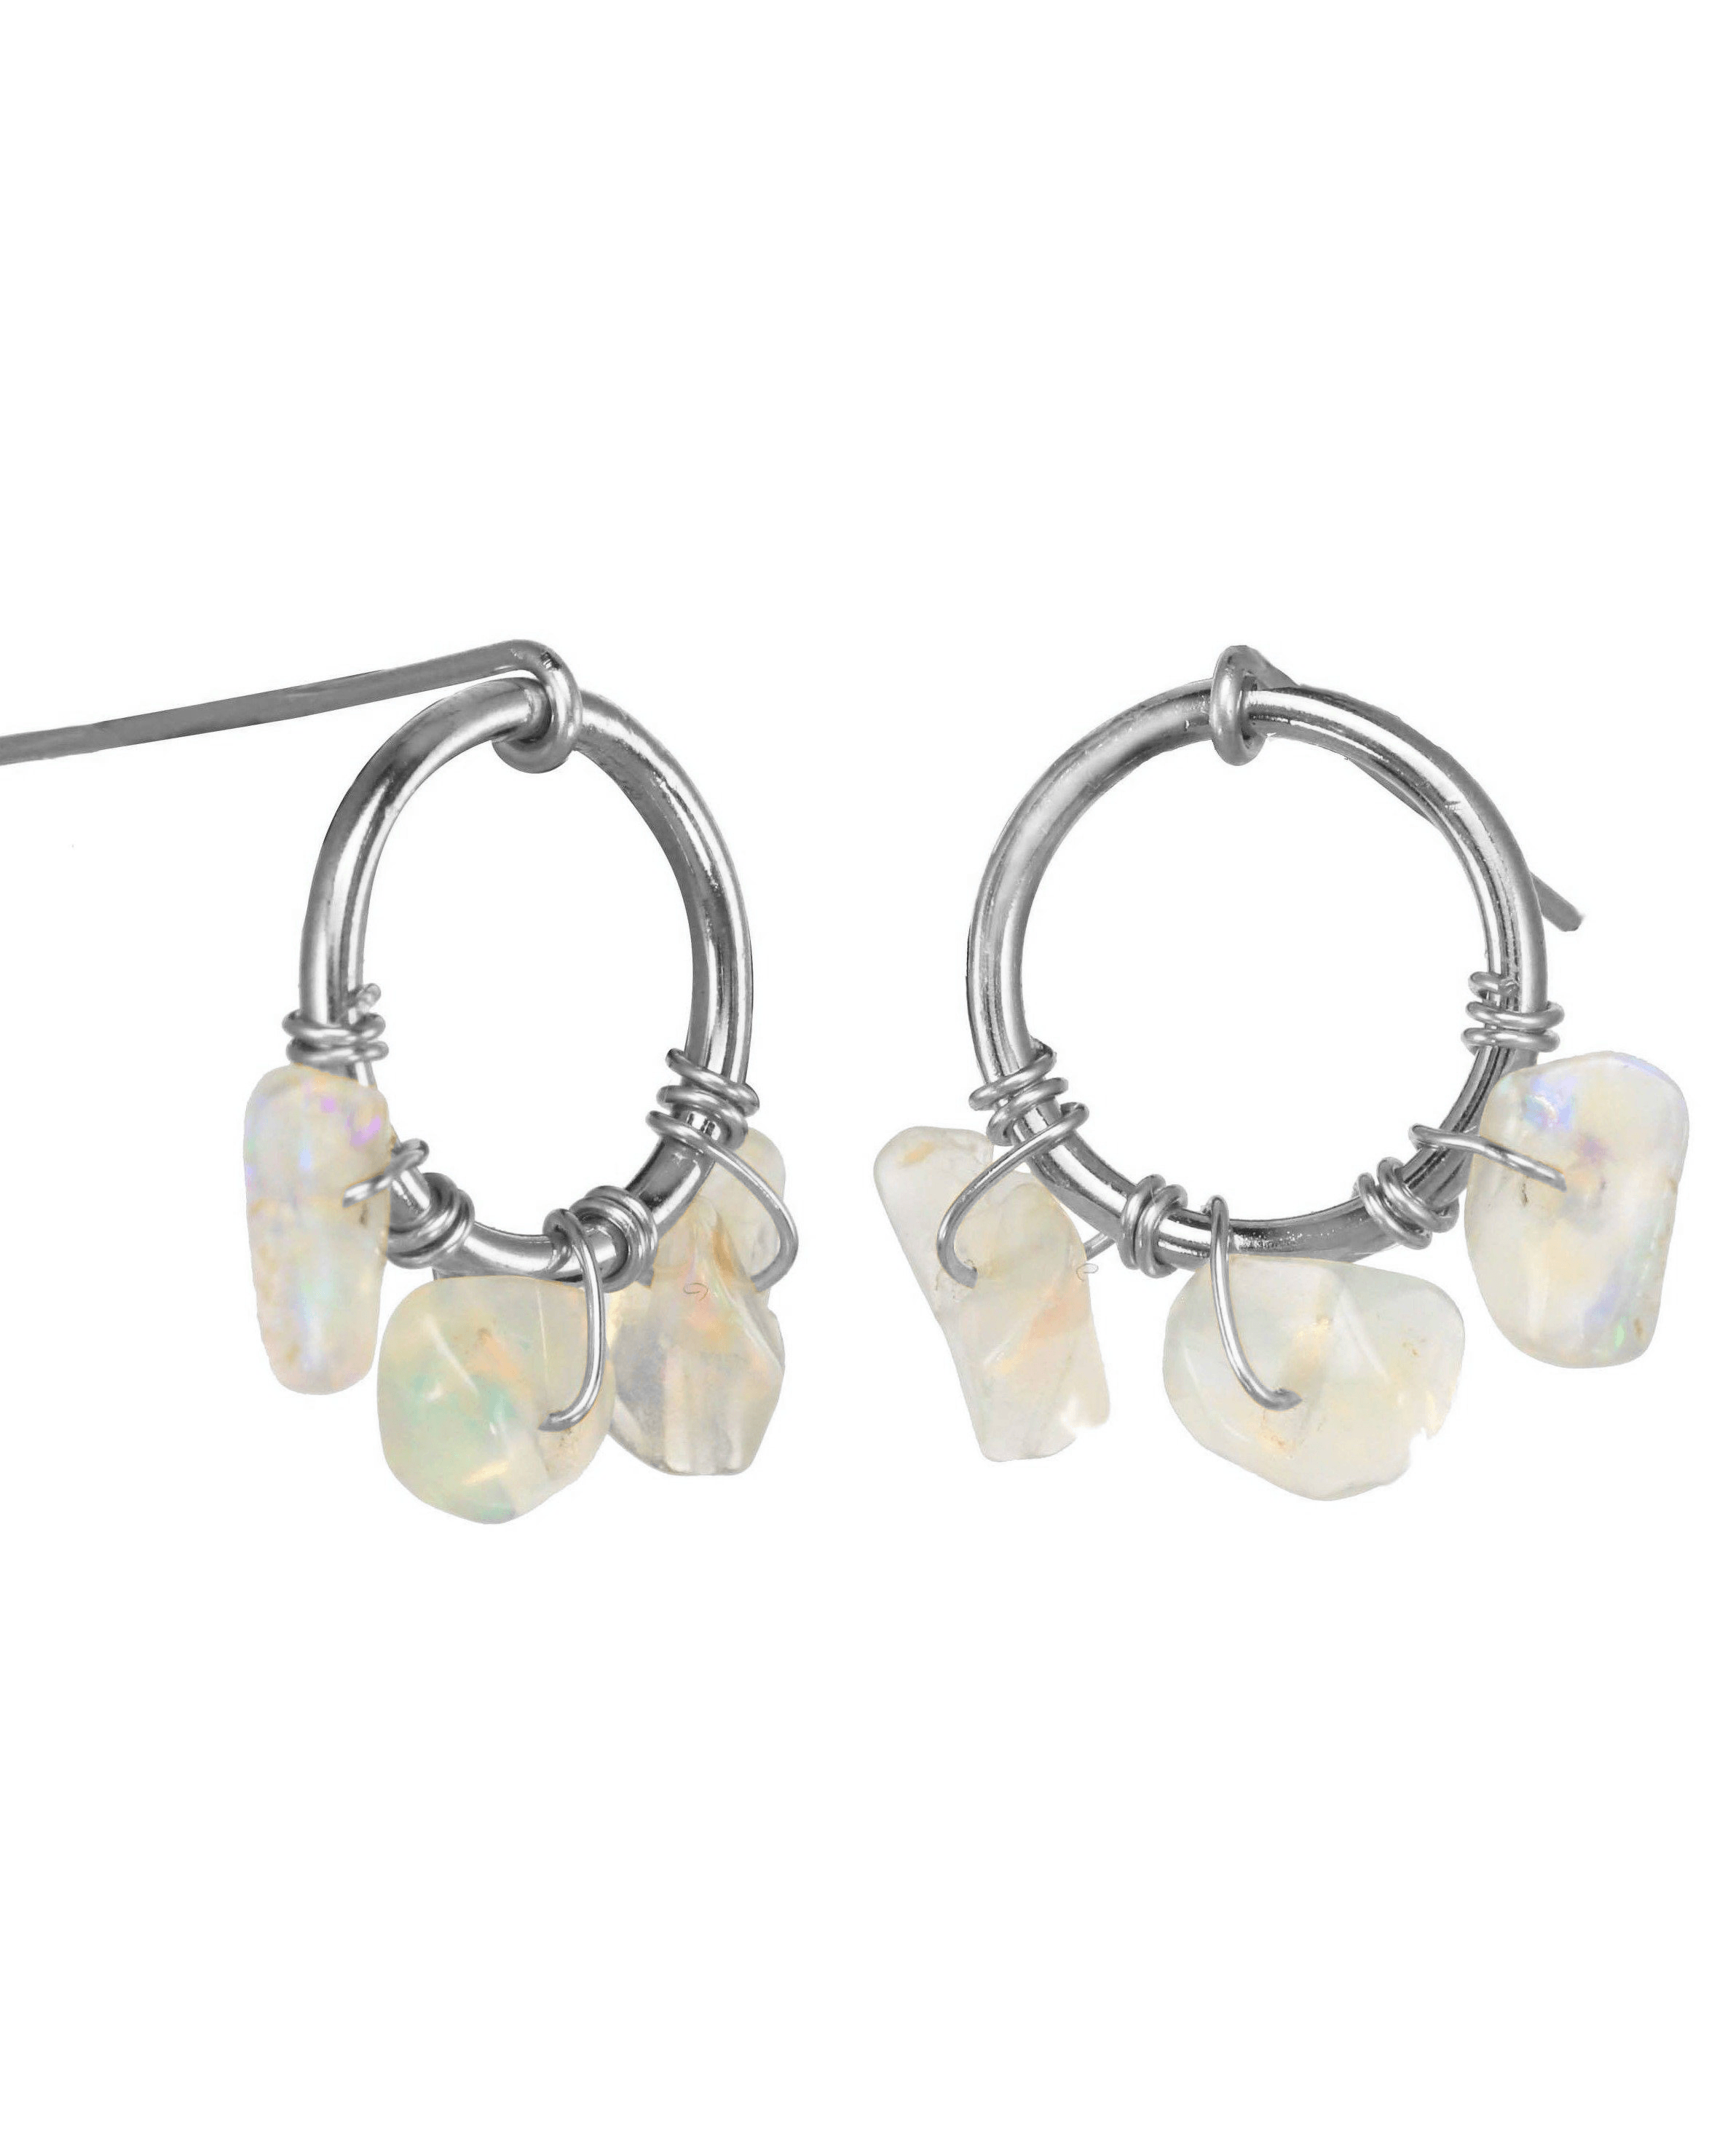 Brillante Earrings by KOZAKH. Short dangling earrings, crafted in Sterling Silver, embellished with Opal chips.